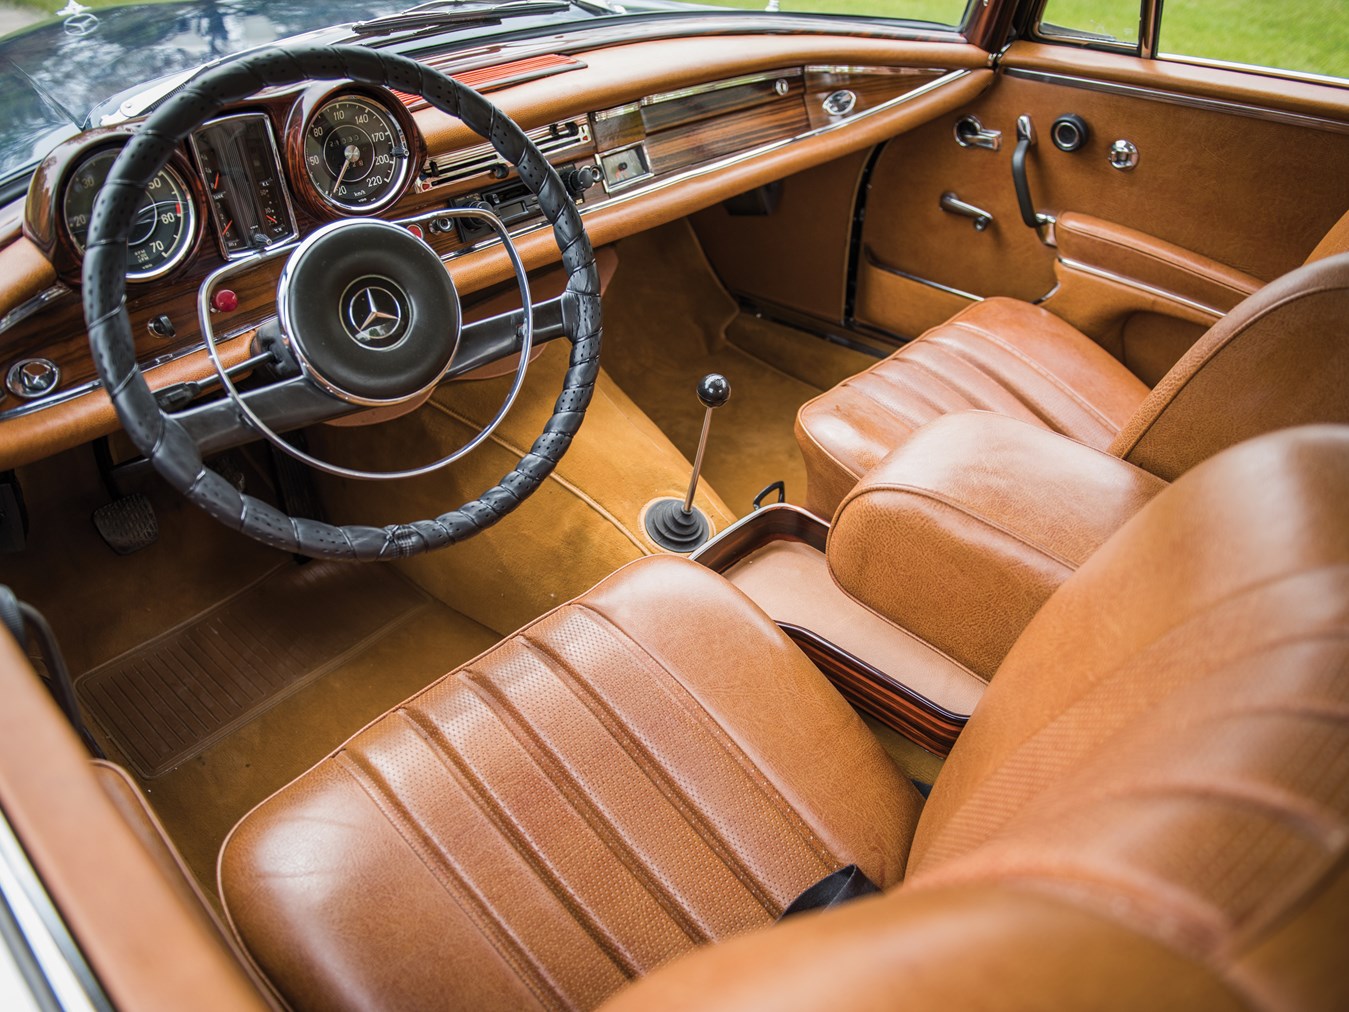 The manual transmission of this 1965 300 SE coupé makes it a luxurious driver's car with opulent mid-tan leather seats and wood veneer dashboard.